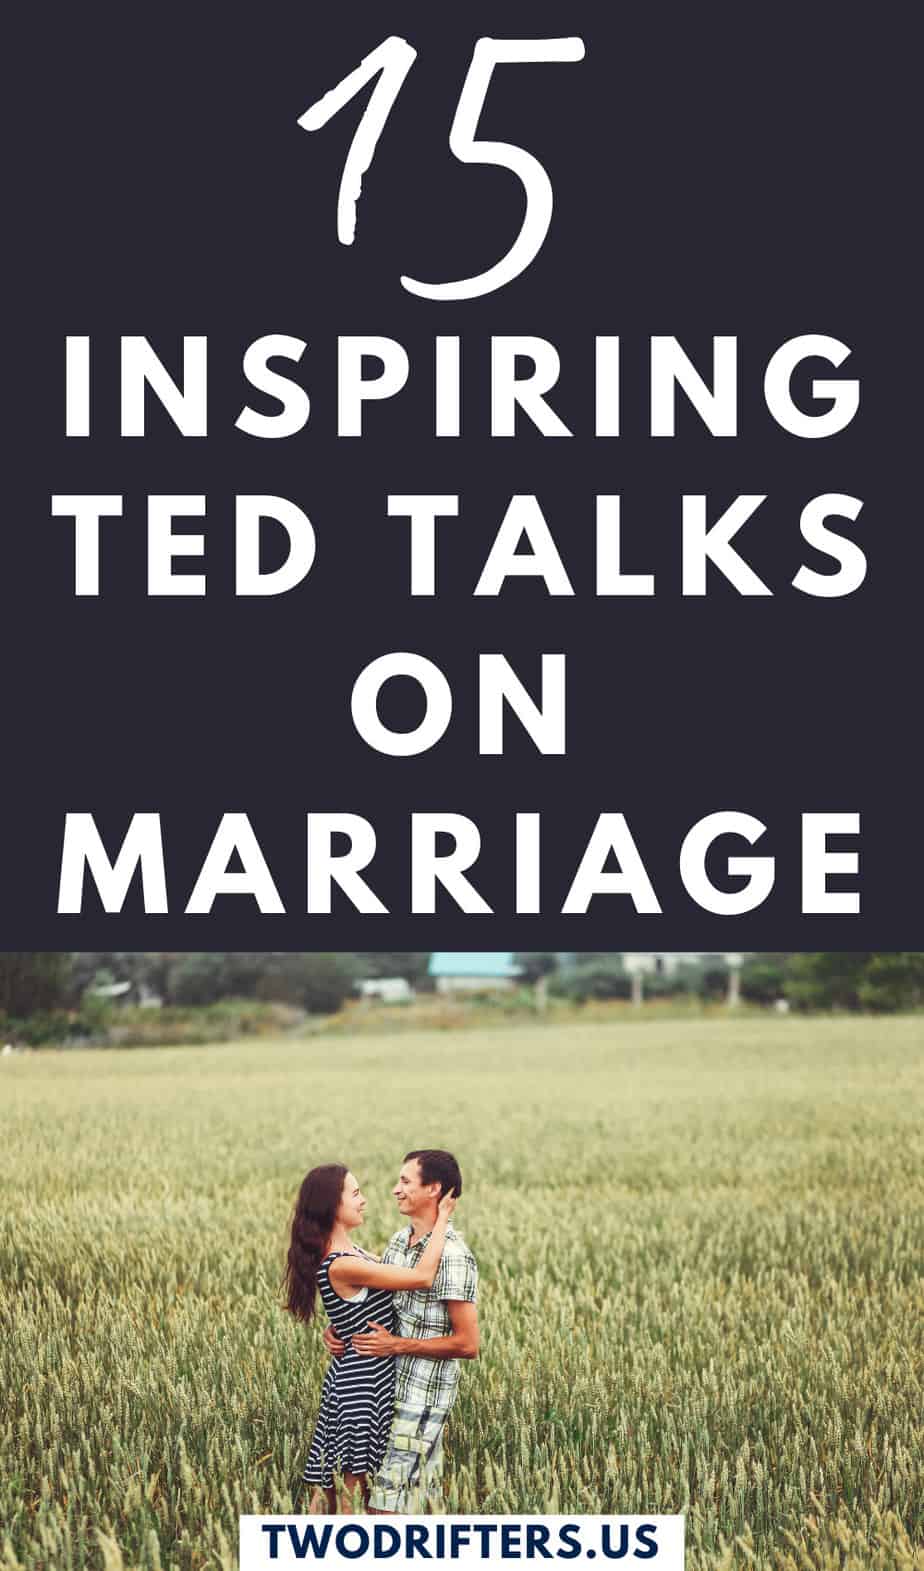 Pinterest social image that says “15 inspiring ted talks on marriage.”